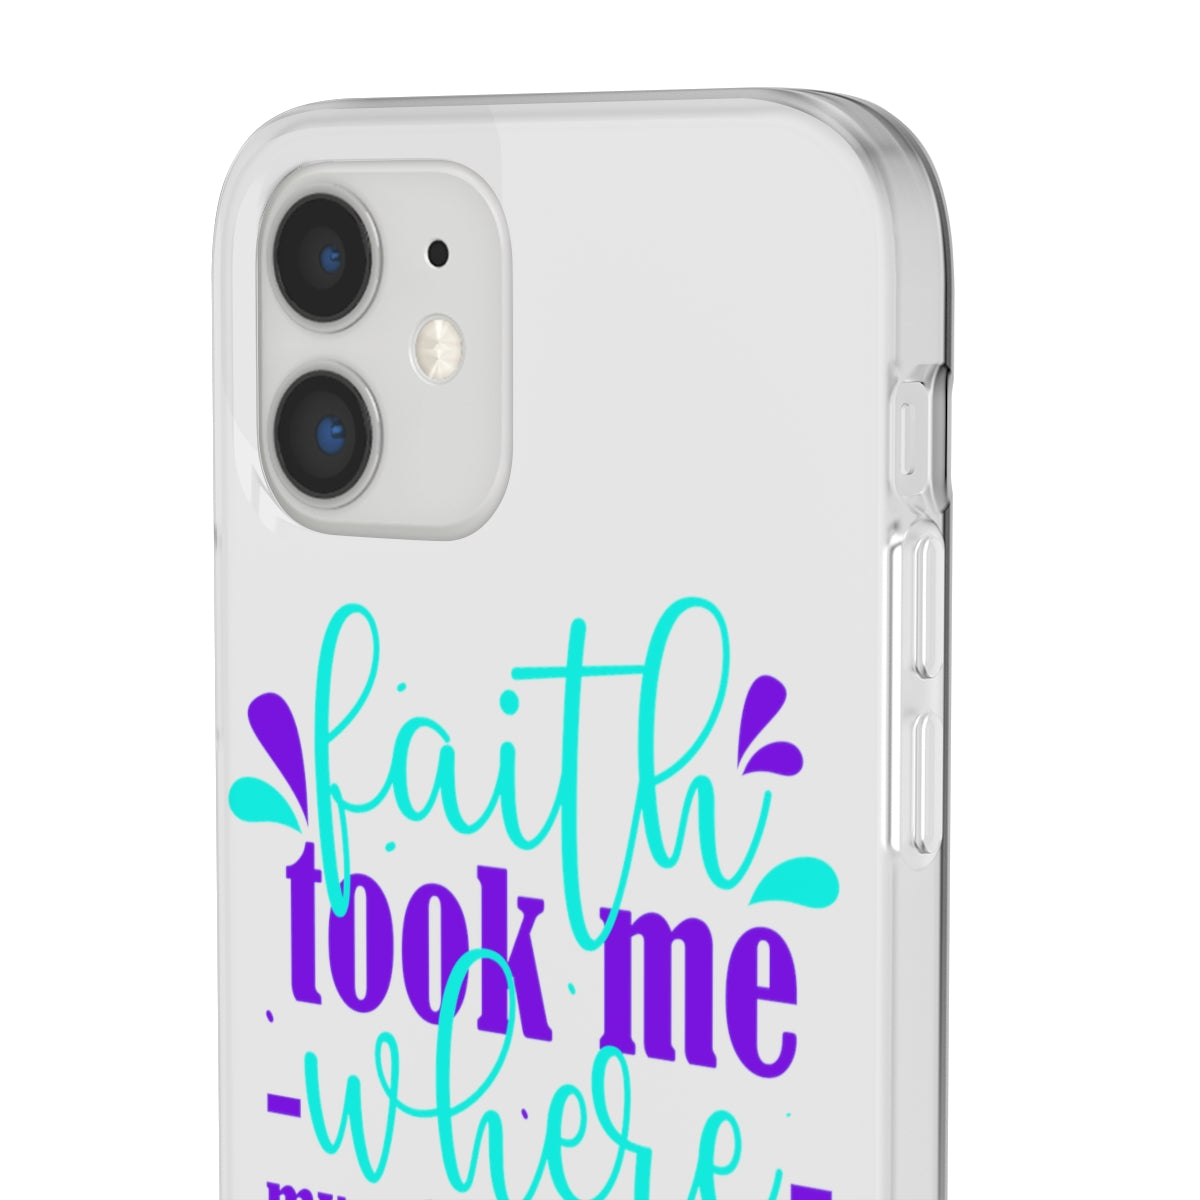 Faith Took Me Where My Mind Could Not  Flexi Phone Case.compatible with select IPhone & Samsung Galaxy Phones Printify